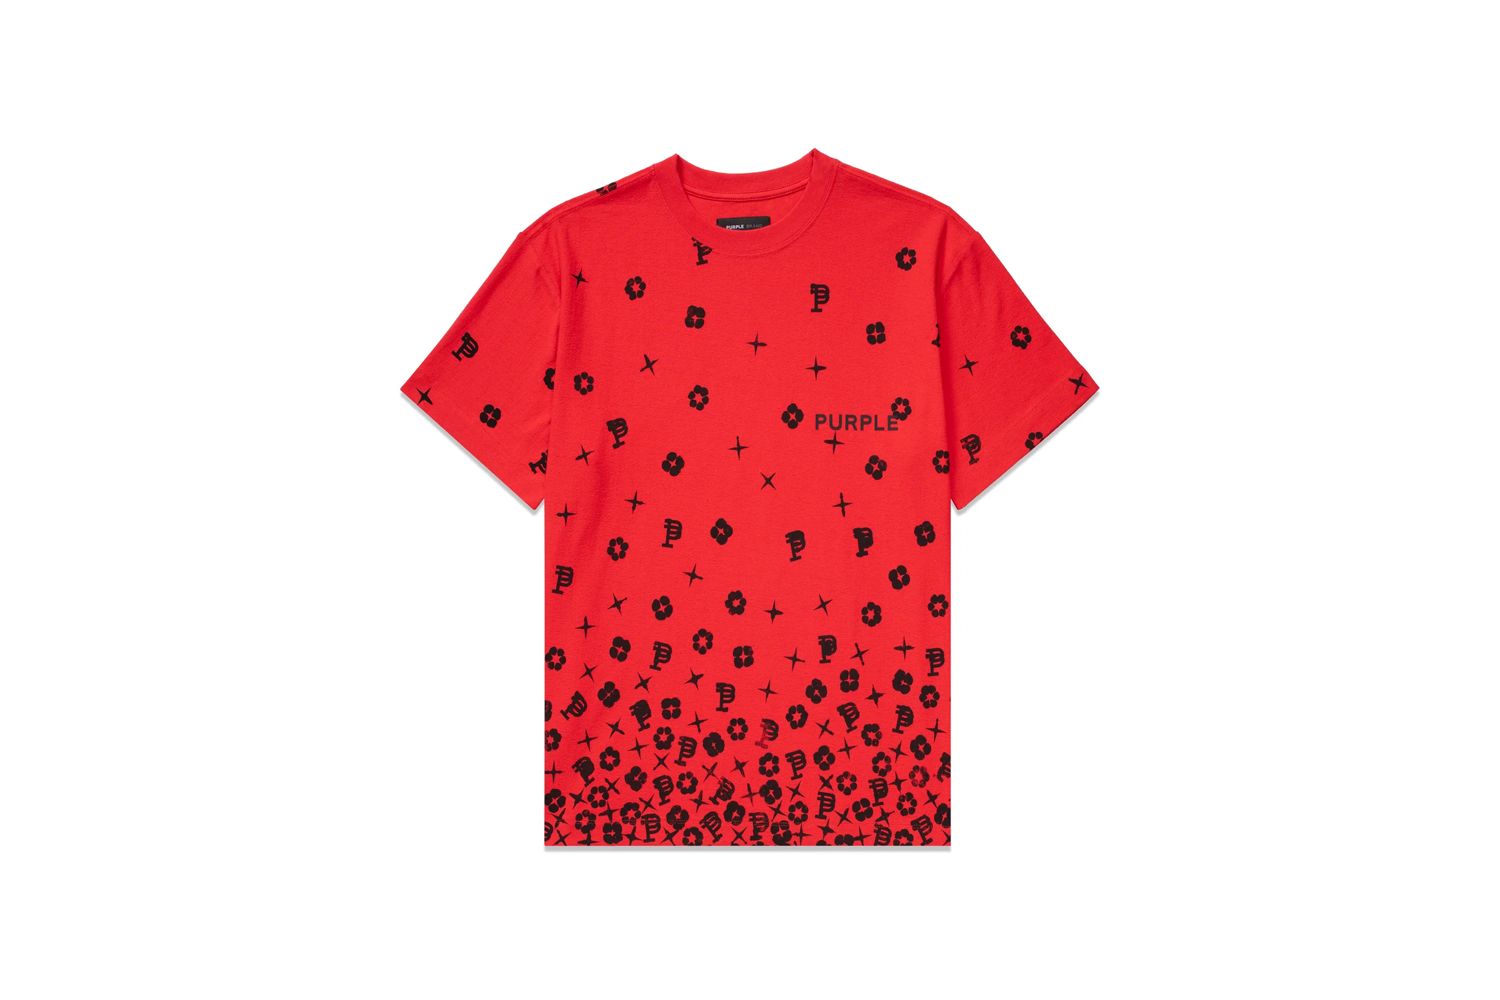 TEXTURED JERSEY RED SCATTERED MONOGRAM TEE